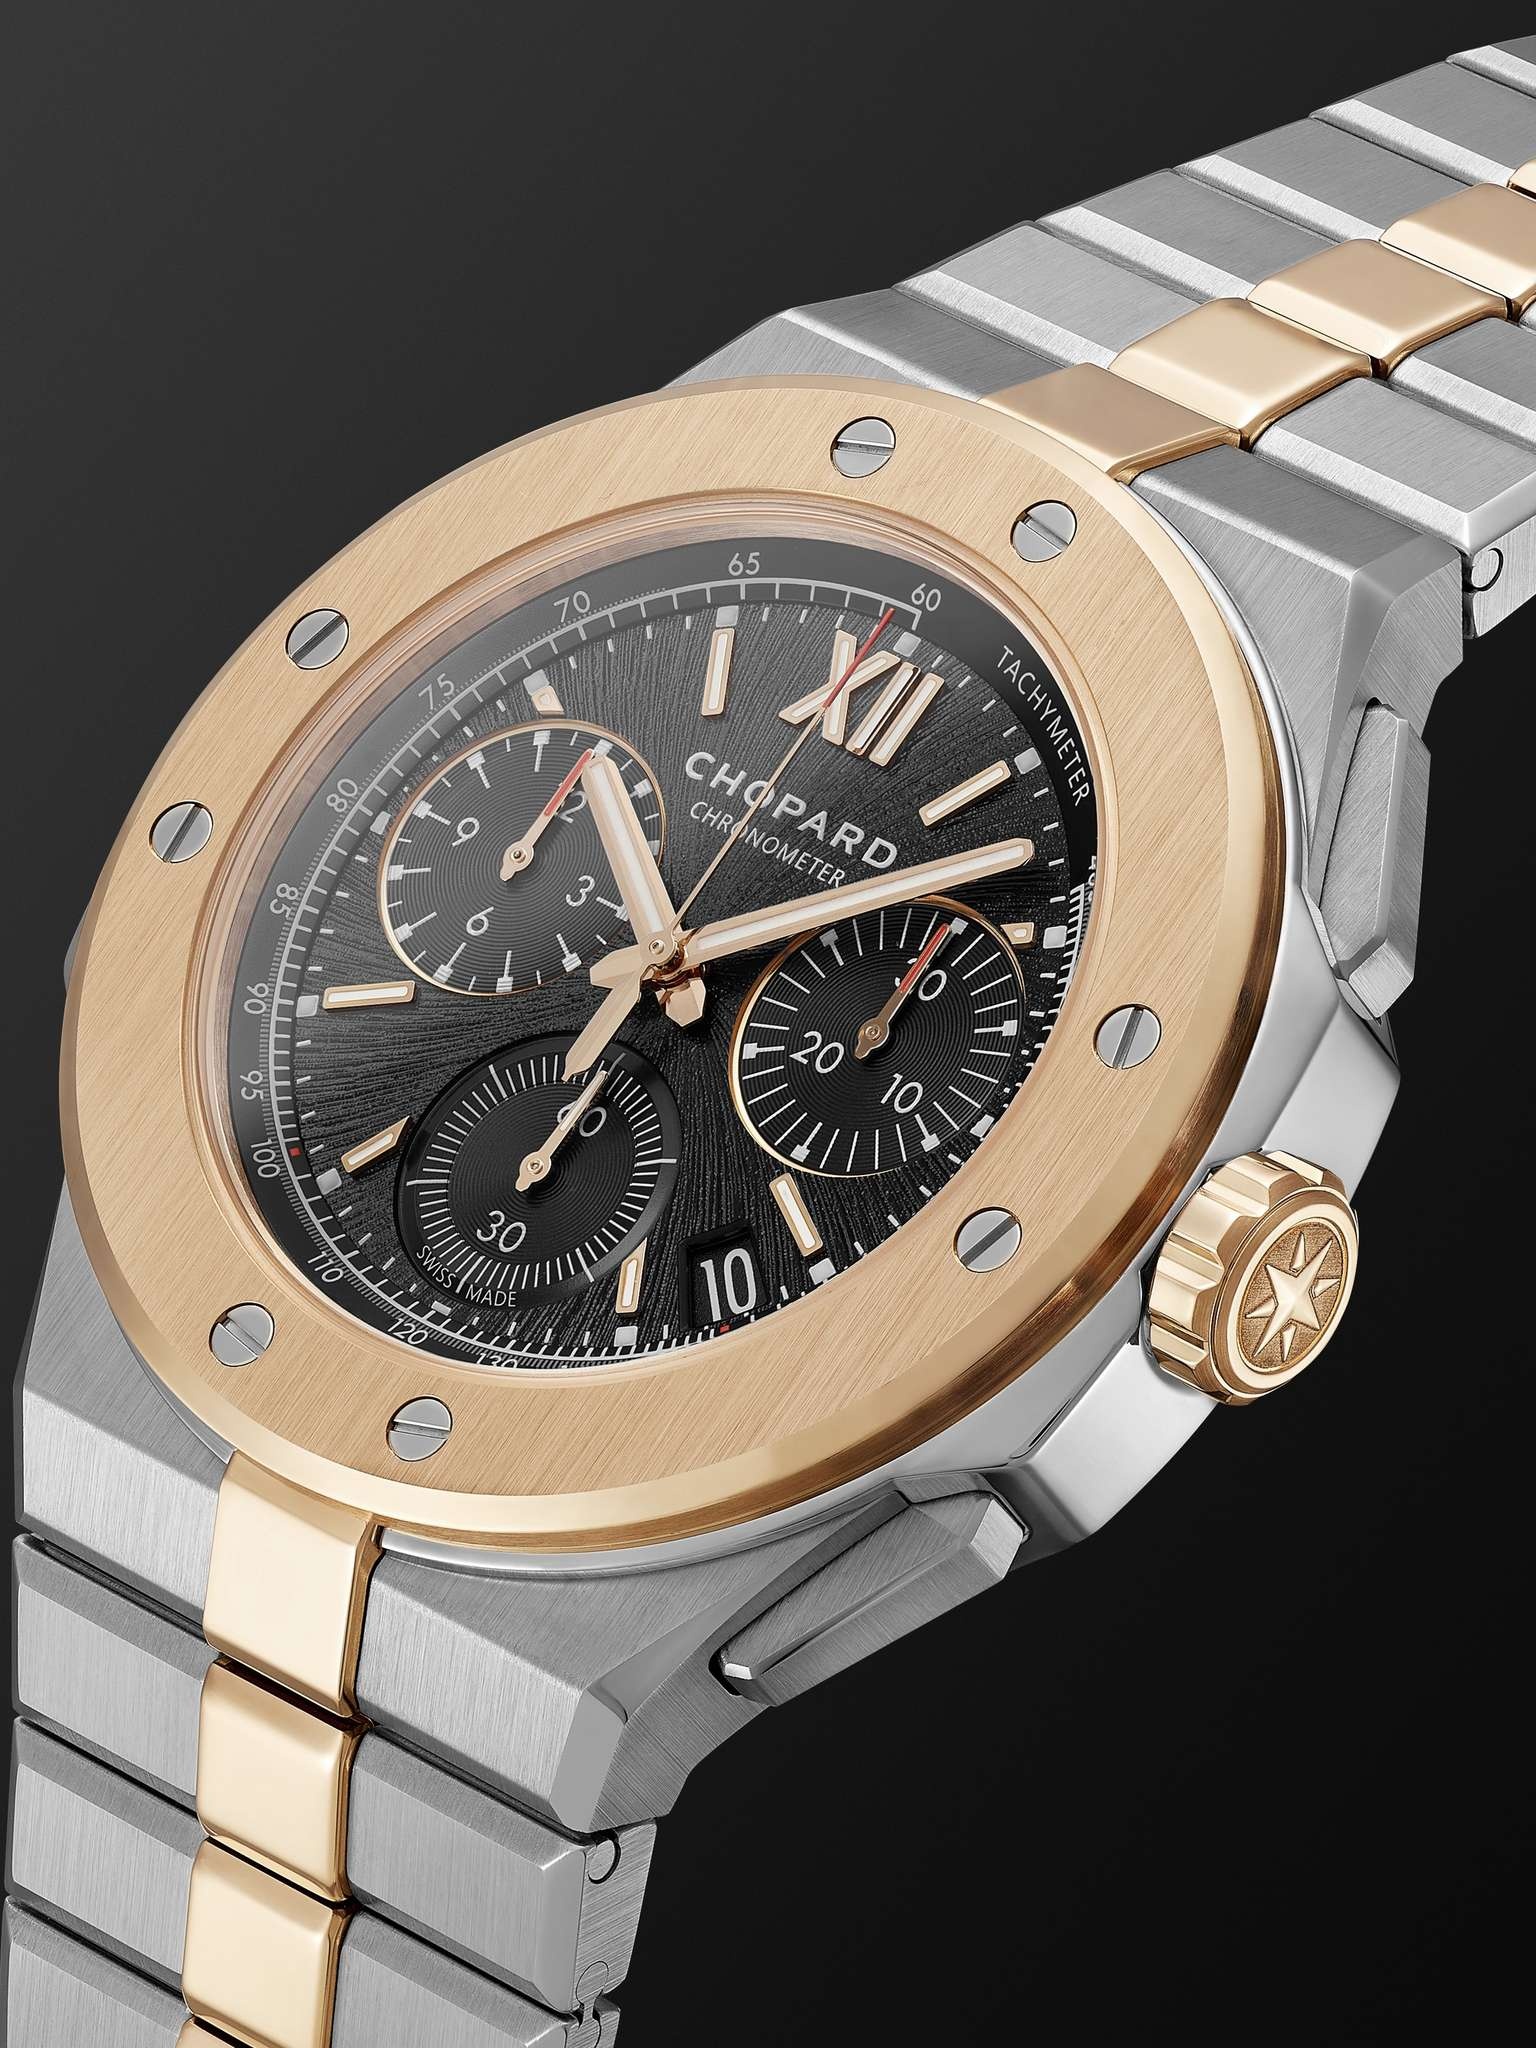 Alpine Eagle XL Chrono Automatic 44mm Lucent Steel and 18-Karat Rose Gold Watch, Ref. No. 298609-600 - 4